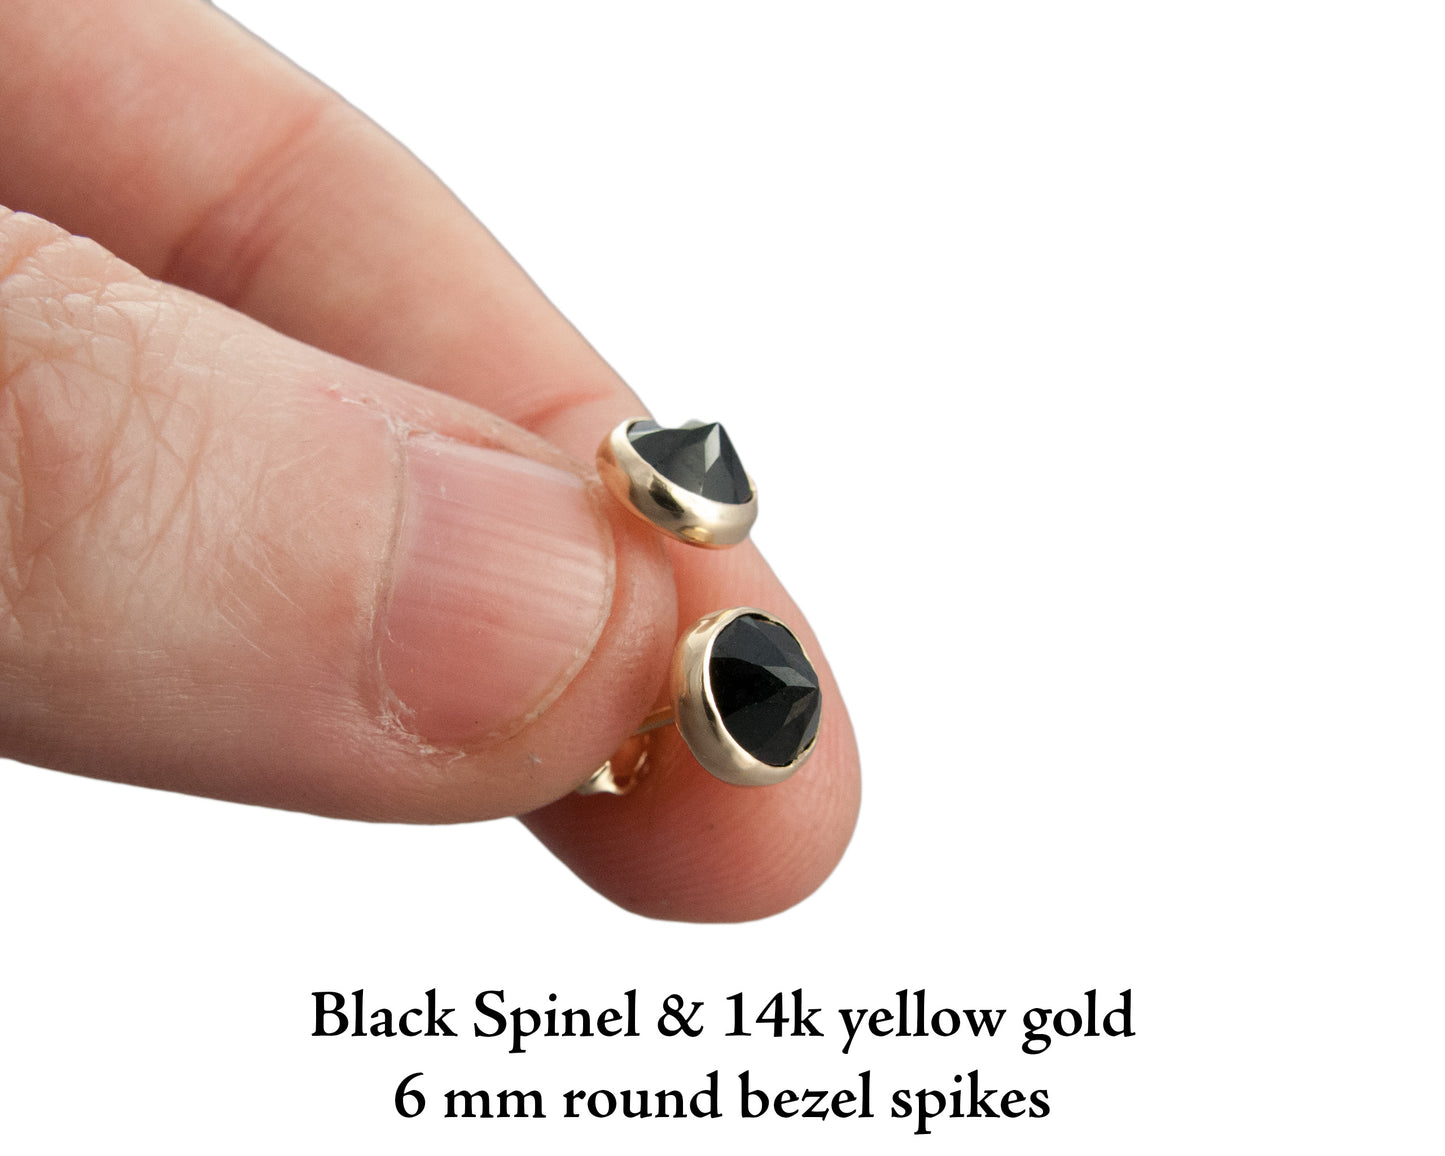 Black Spinel and Gold Spikes - 6mm solid 14k yellow gold Stud Earrings - Ready to Ship